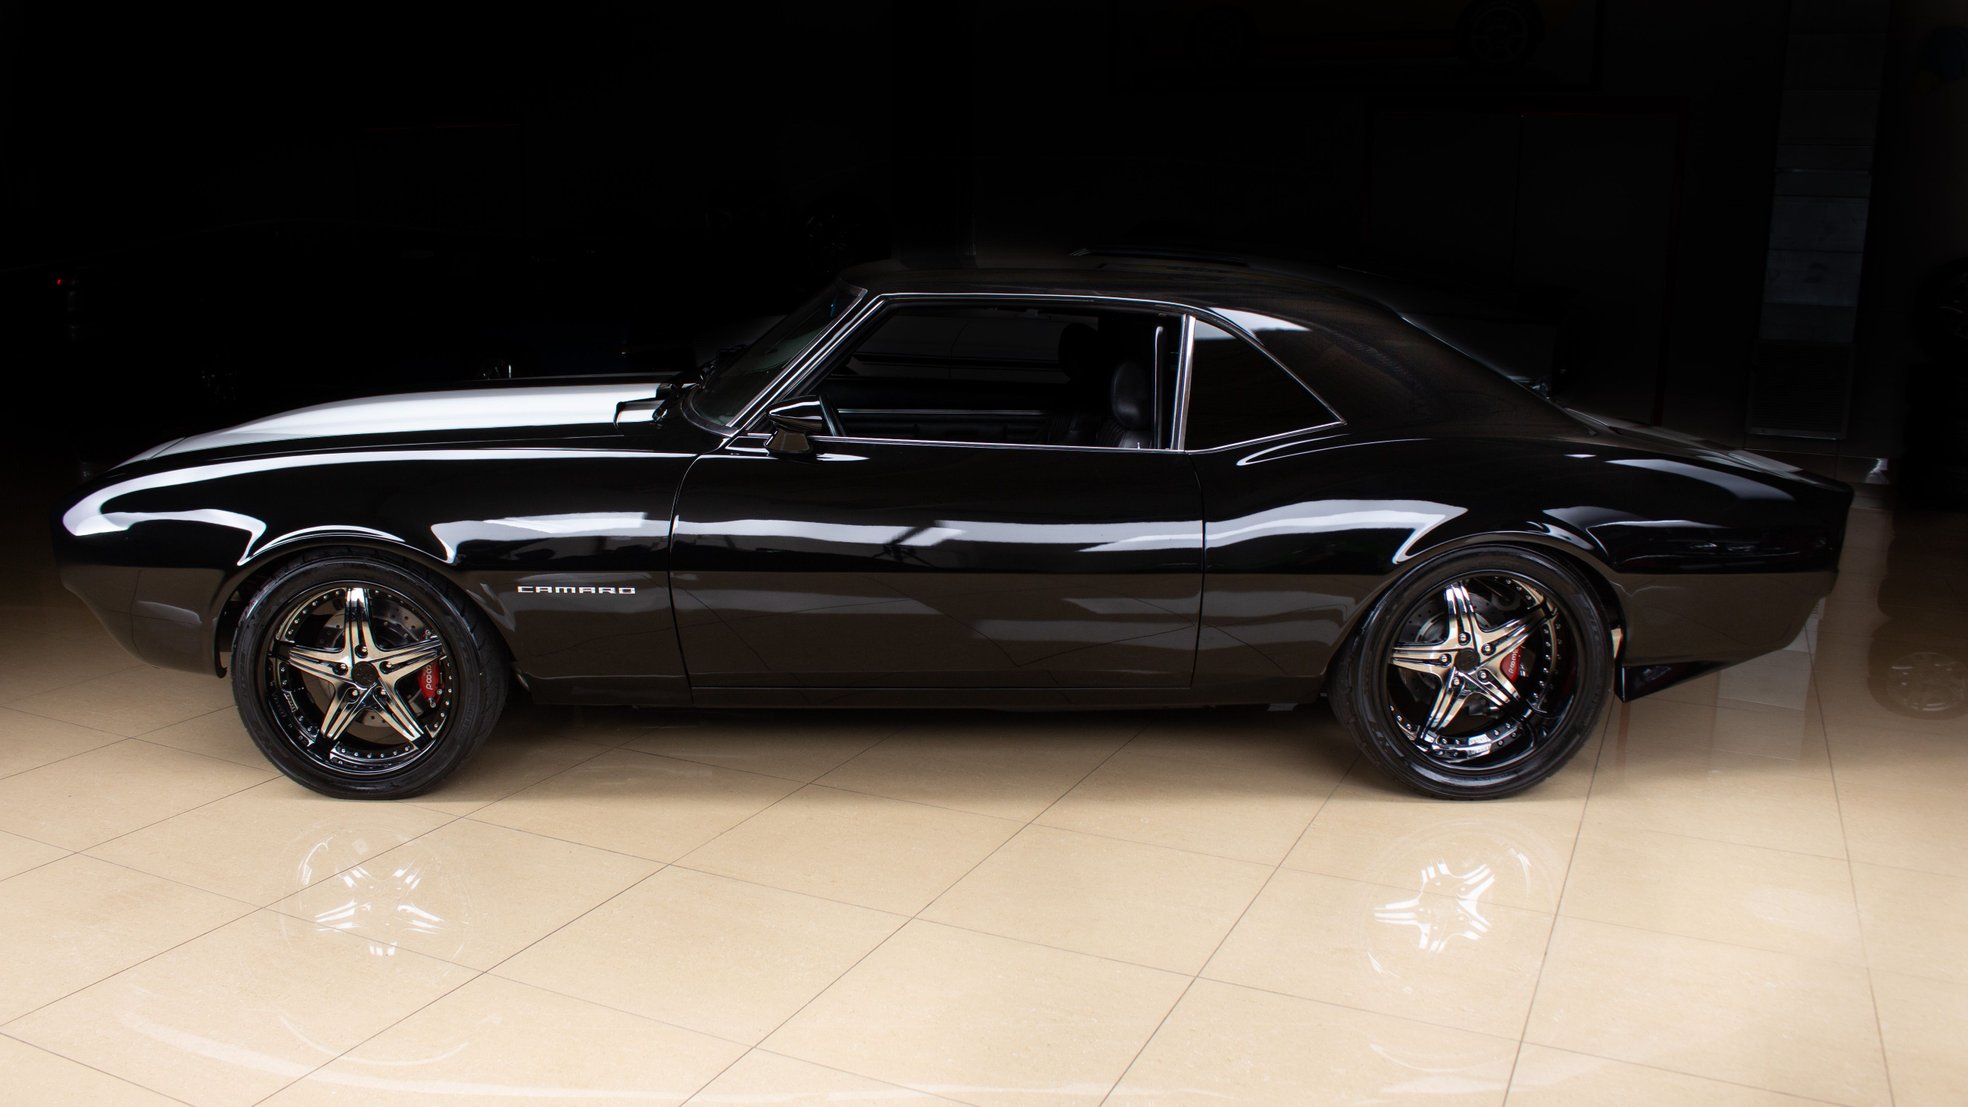 1968 Chevrolet Camaro - How Cool Is That?